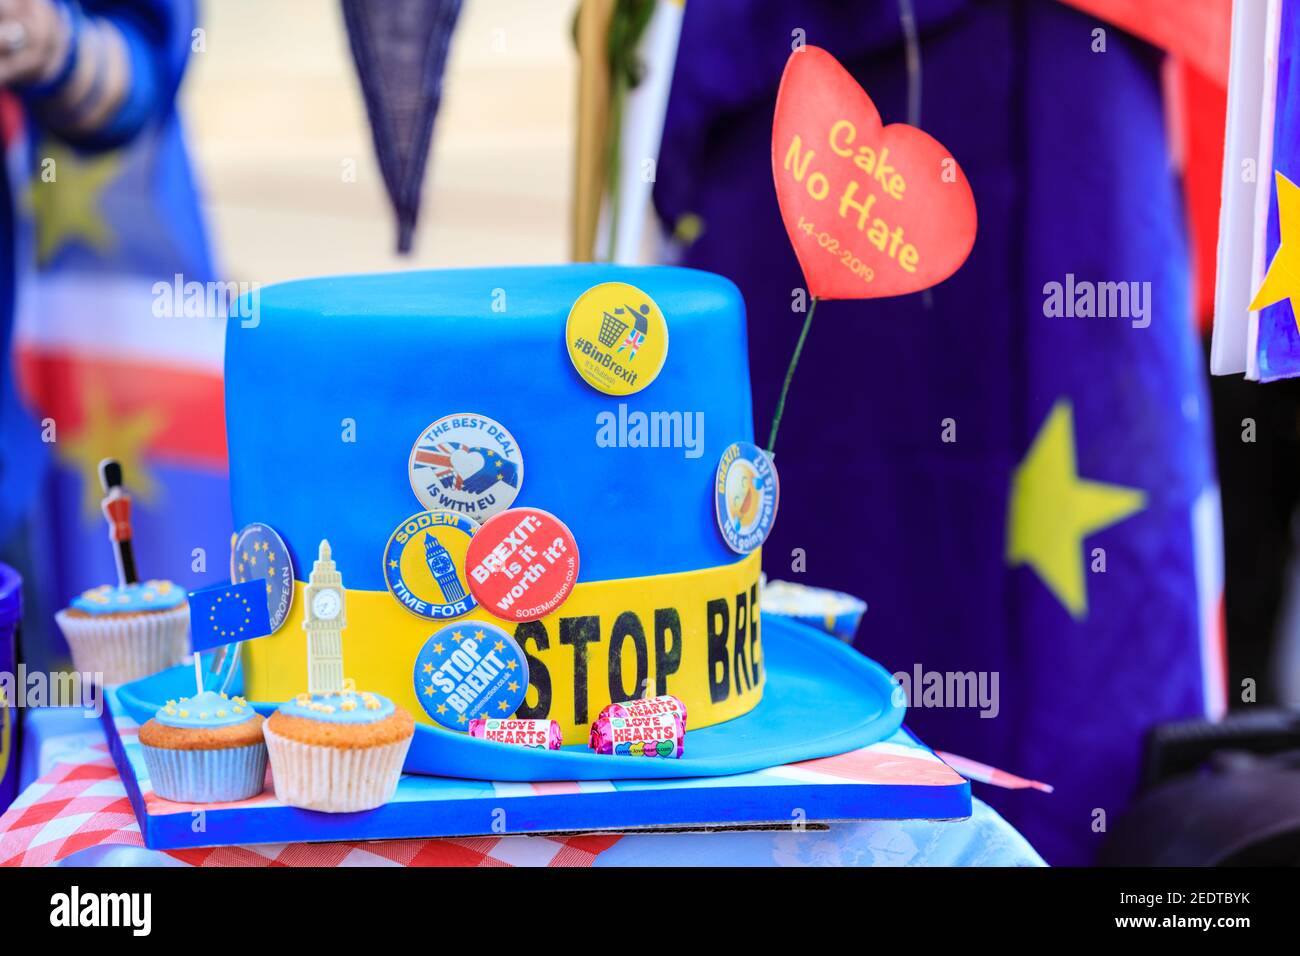 Stop Brexit top hat usually worn by activist Steve Bray, with buttons and stickers, Westminster, London, UK Stock Photo